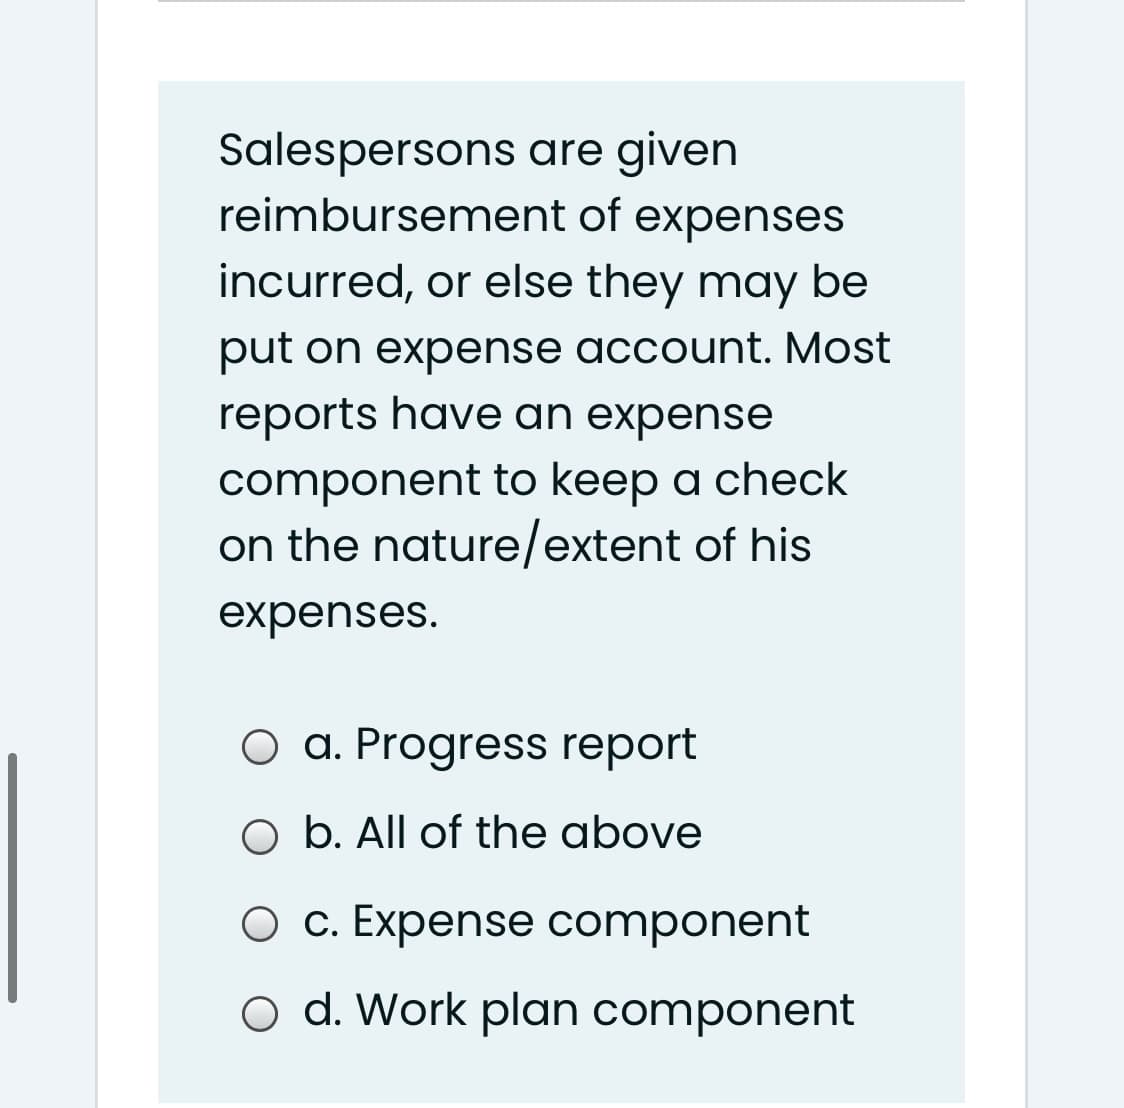 Salespersons are given
reimbursement of expenses
incurred, or else they may be
put on expense account. Most
reports have an expense
component to keep a check
on the nature/extent of his
expenses.
O a. Progress report
O b. All of the above
O c. Expense component
o d. Work plan component
